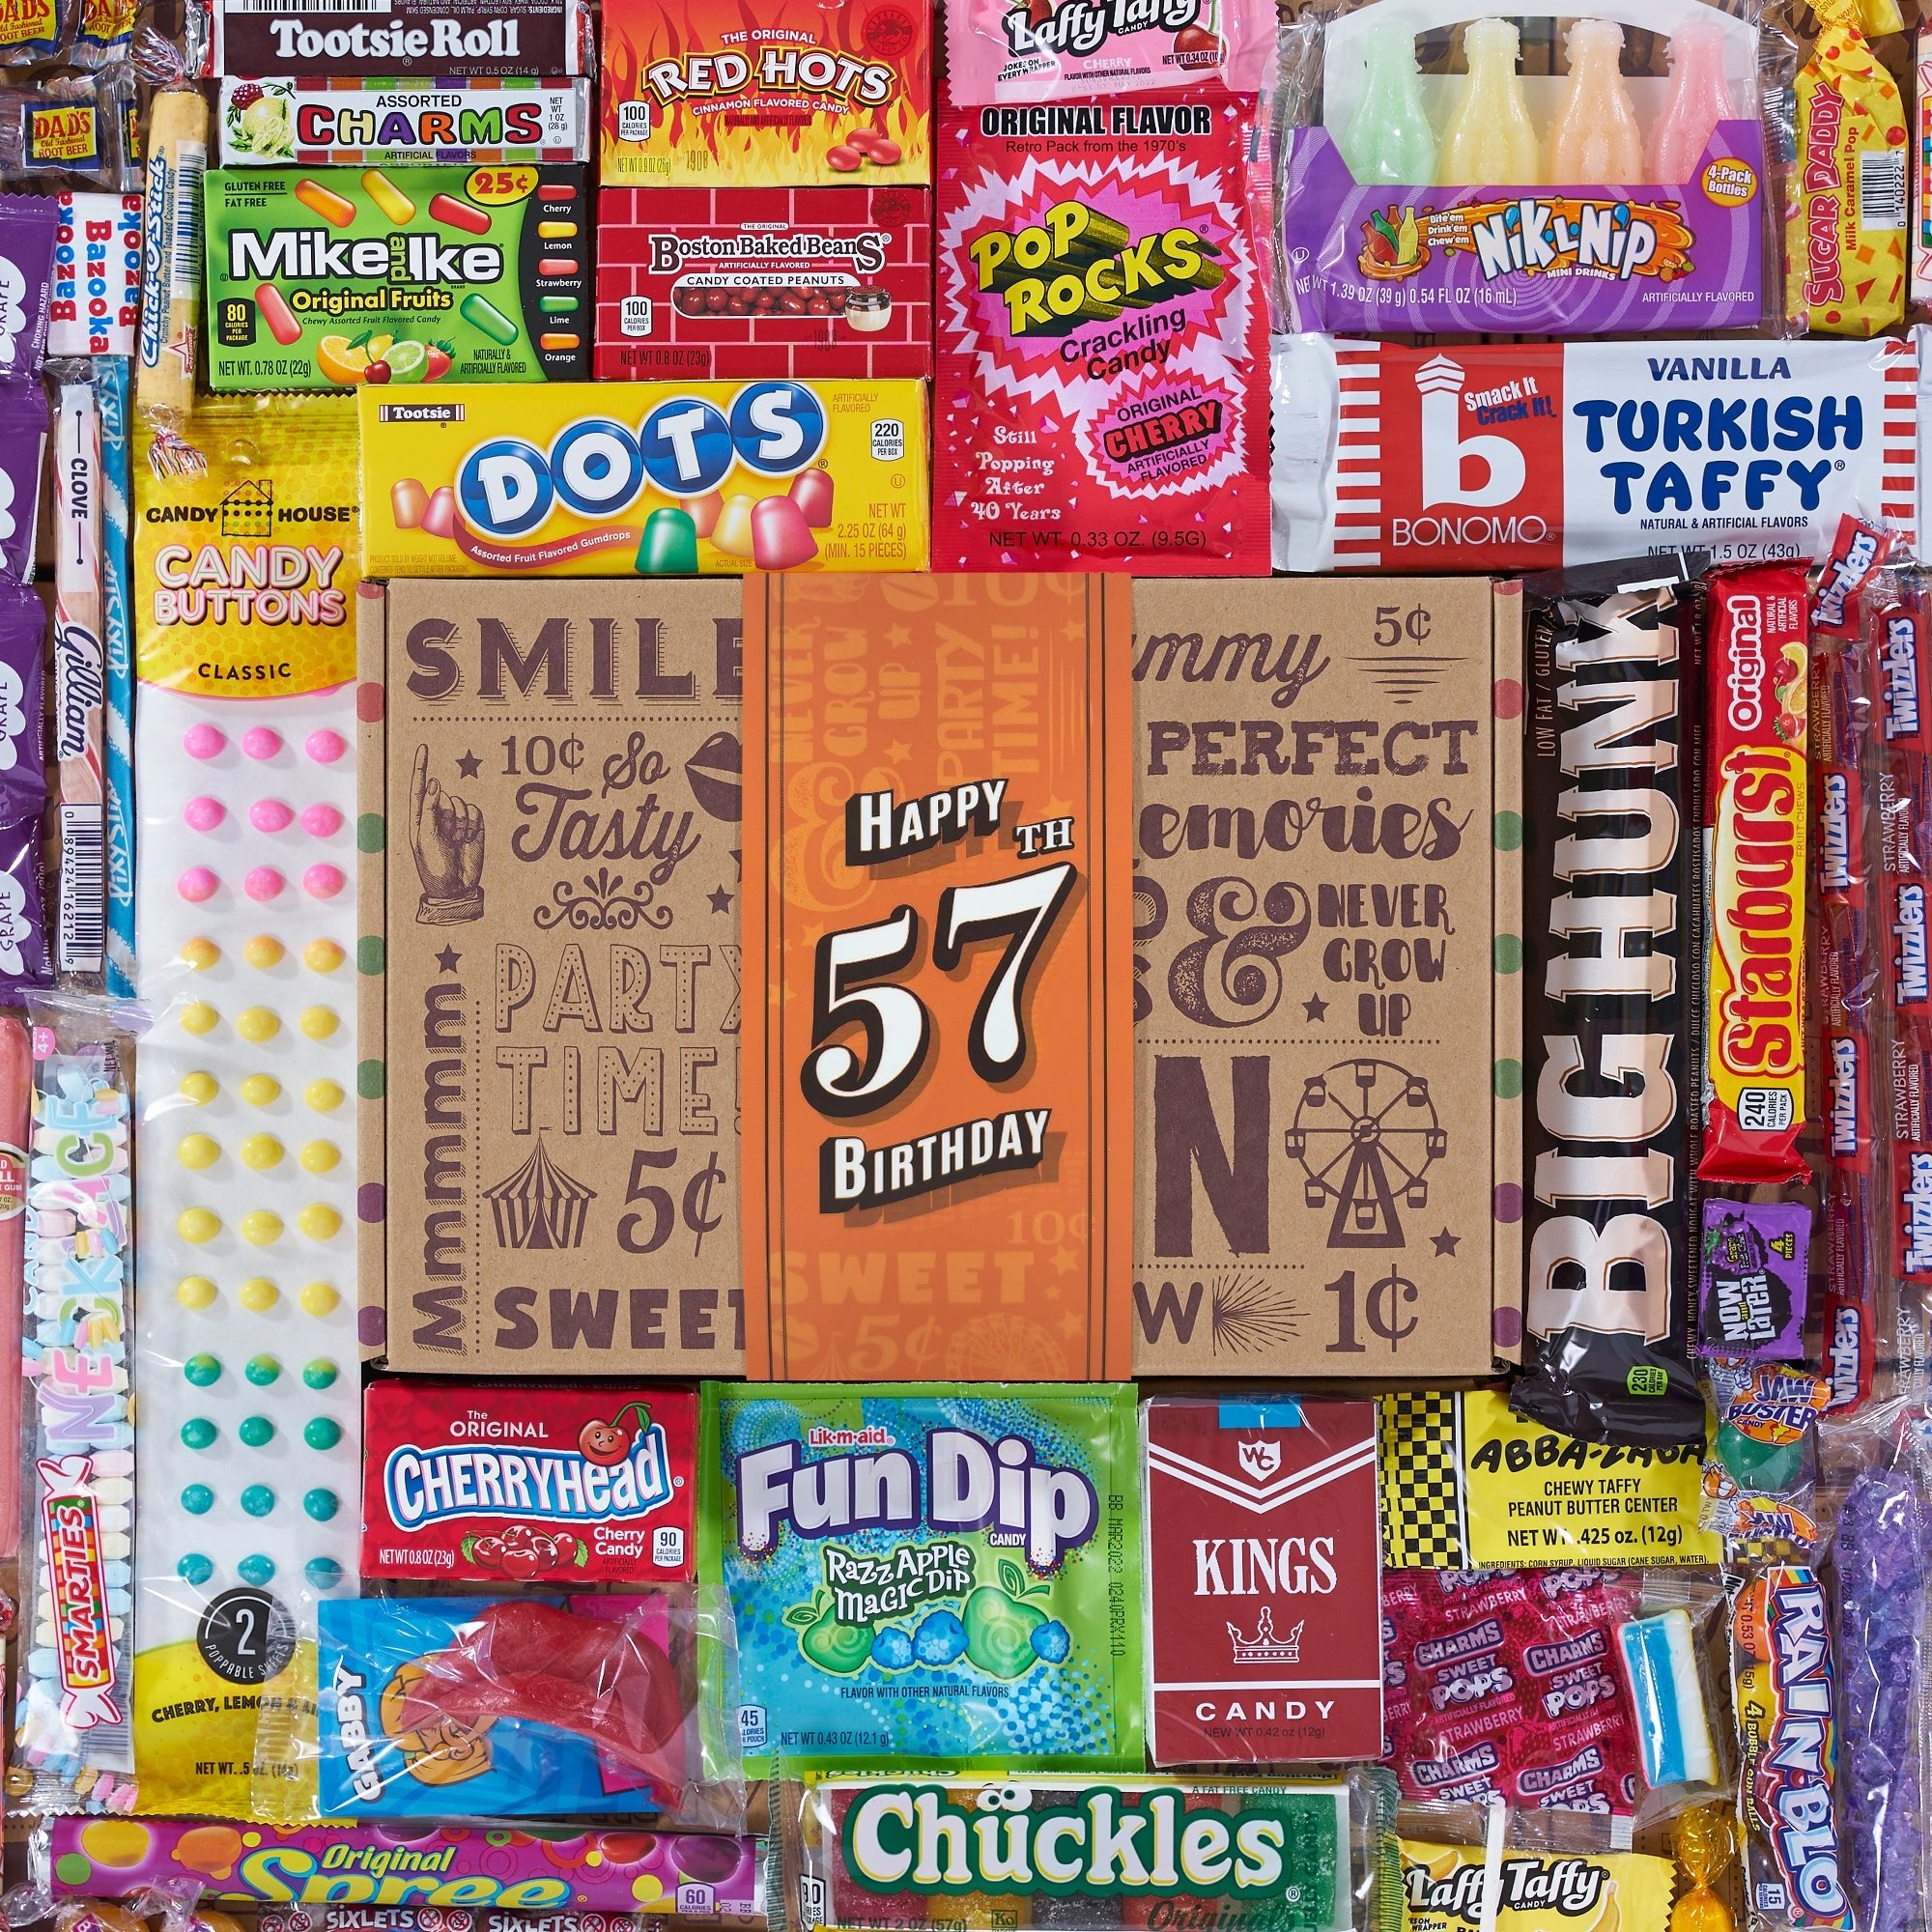 57th Birthday Retro Candy Gift - Vintage Candy Co.